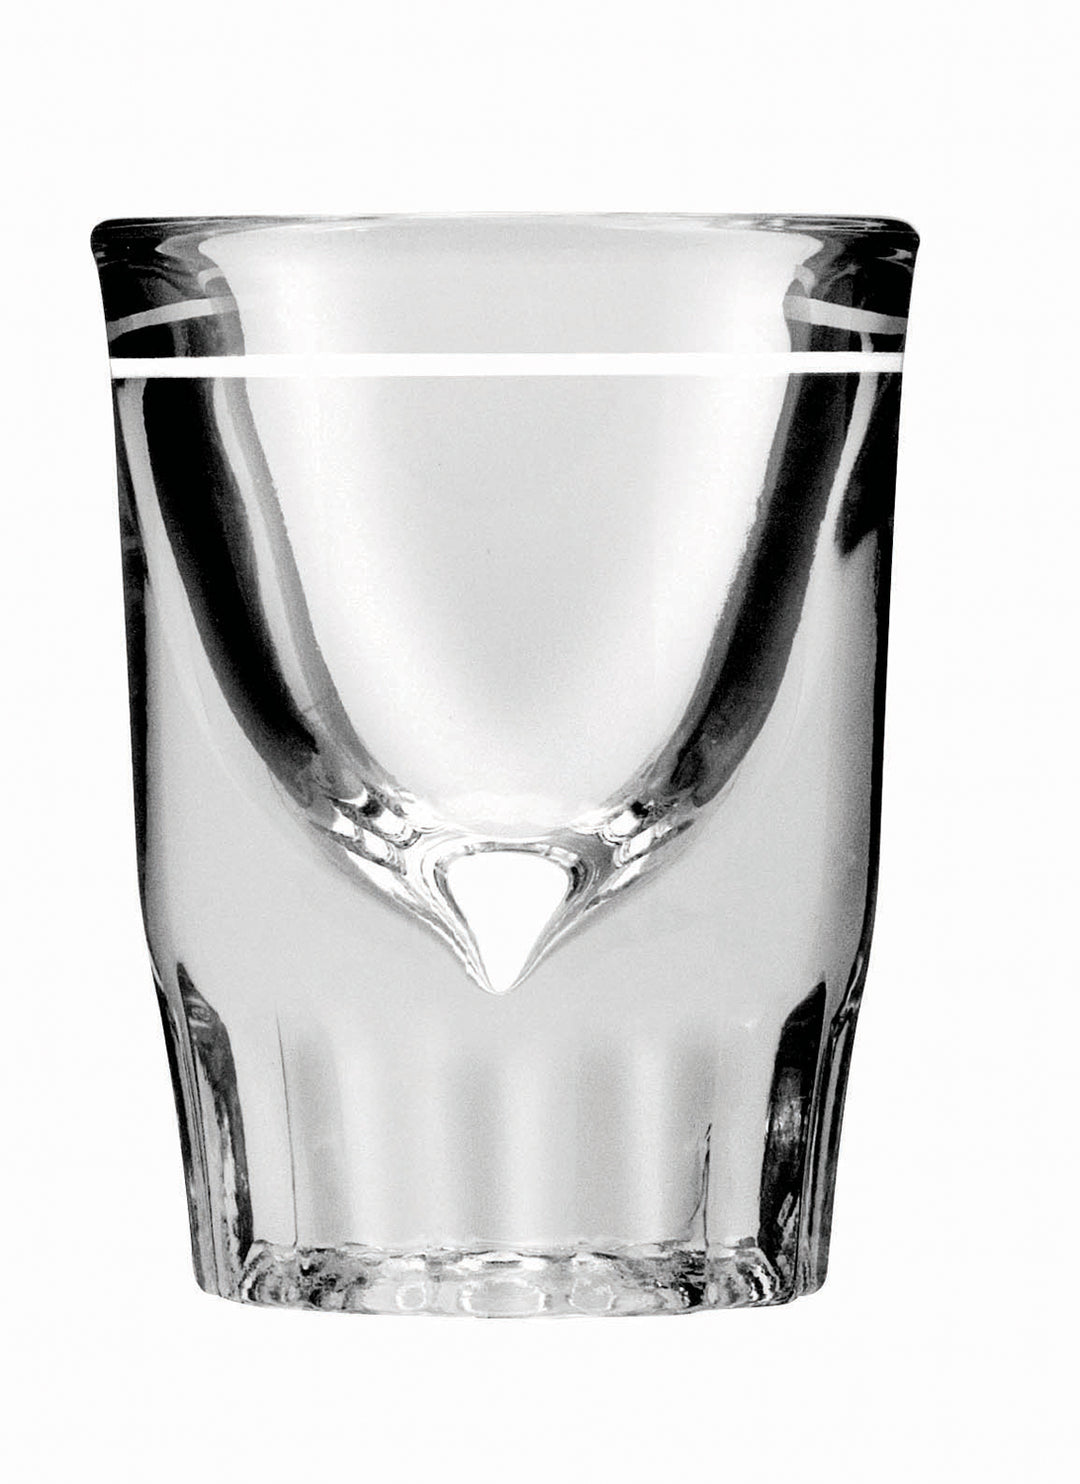 Anchor Hocking 1.5 oz. Whisky Shot Glass With Line-48 Each-1/Case